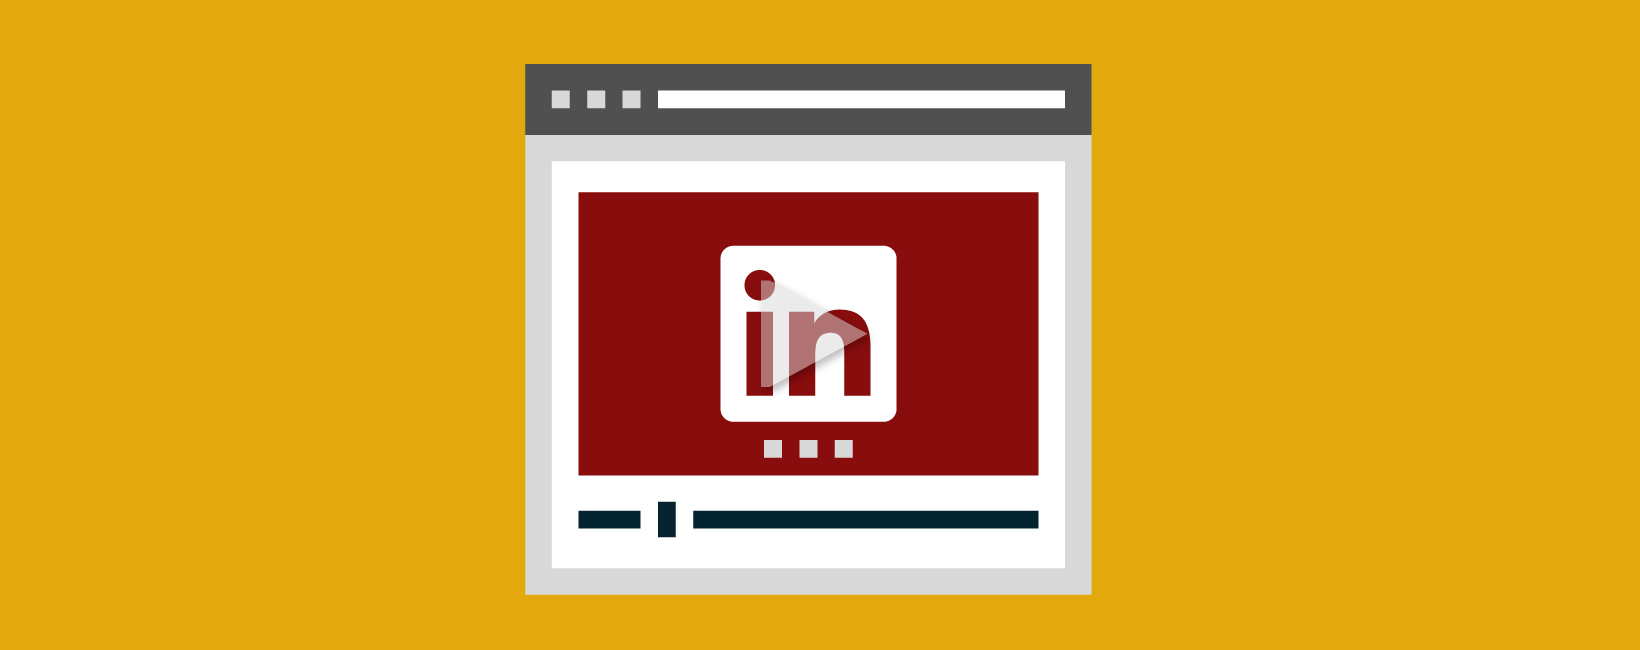 Illustration of the LinkedIn logo in a browser window